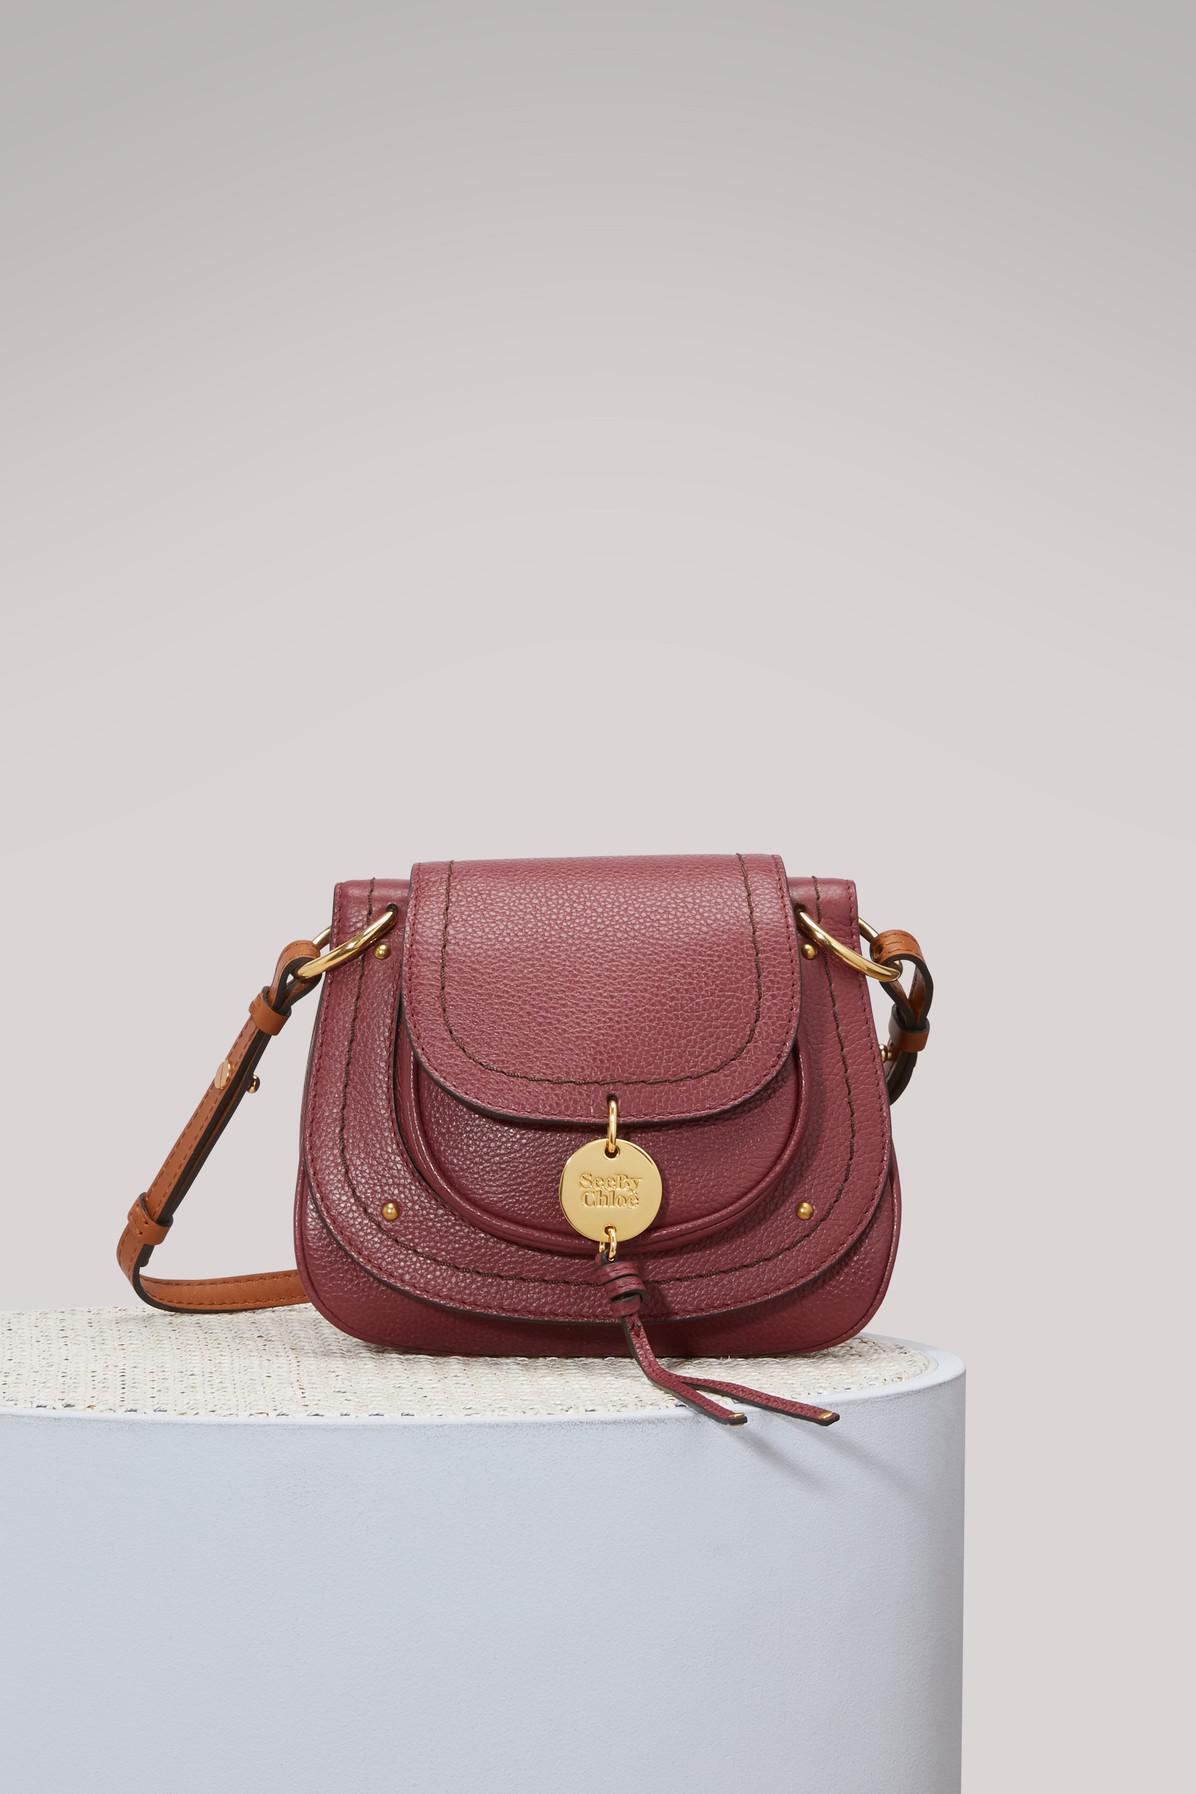 Sac Susie See By Chloé Clearance, SAVE 59%.